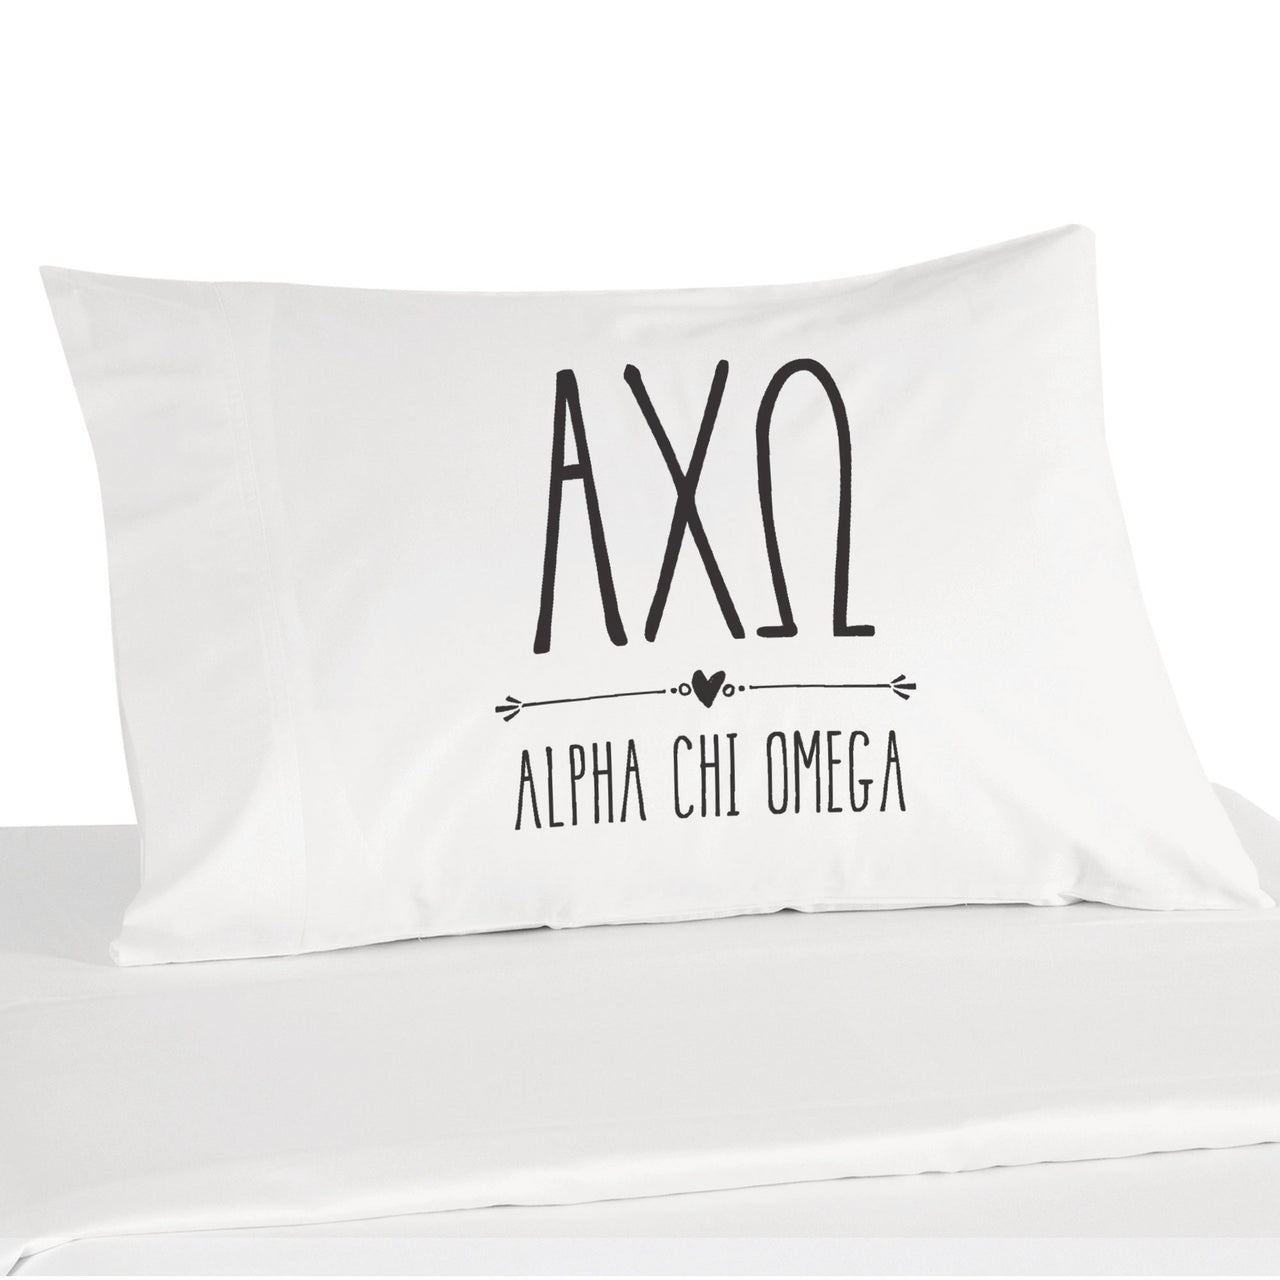 Sorority name and letters custom printed on pillowcase.